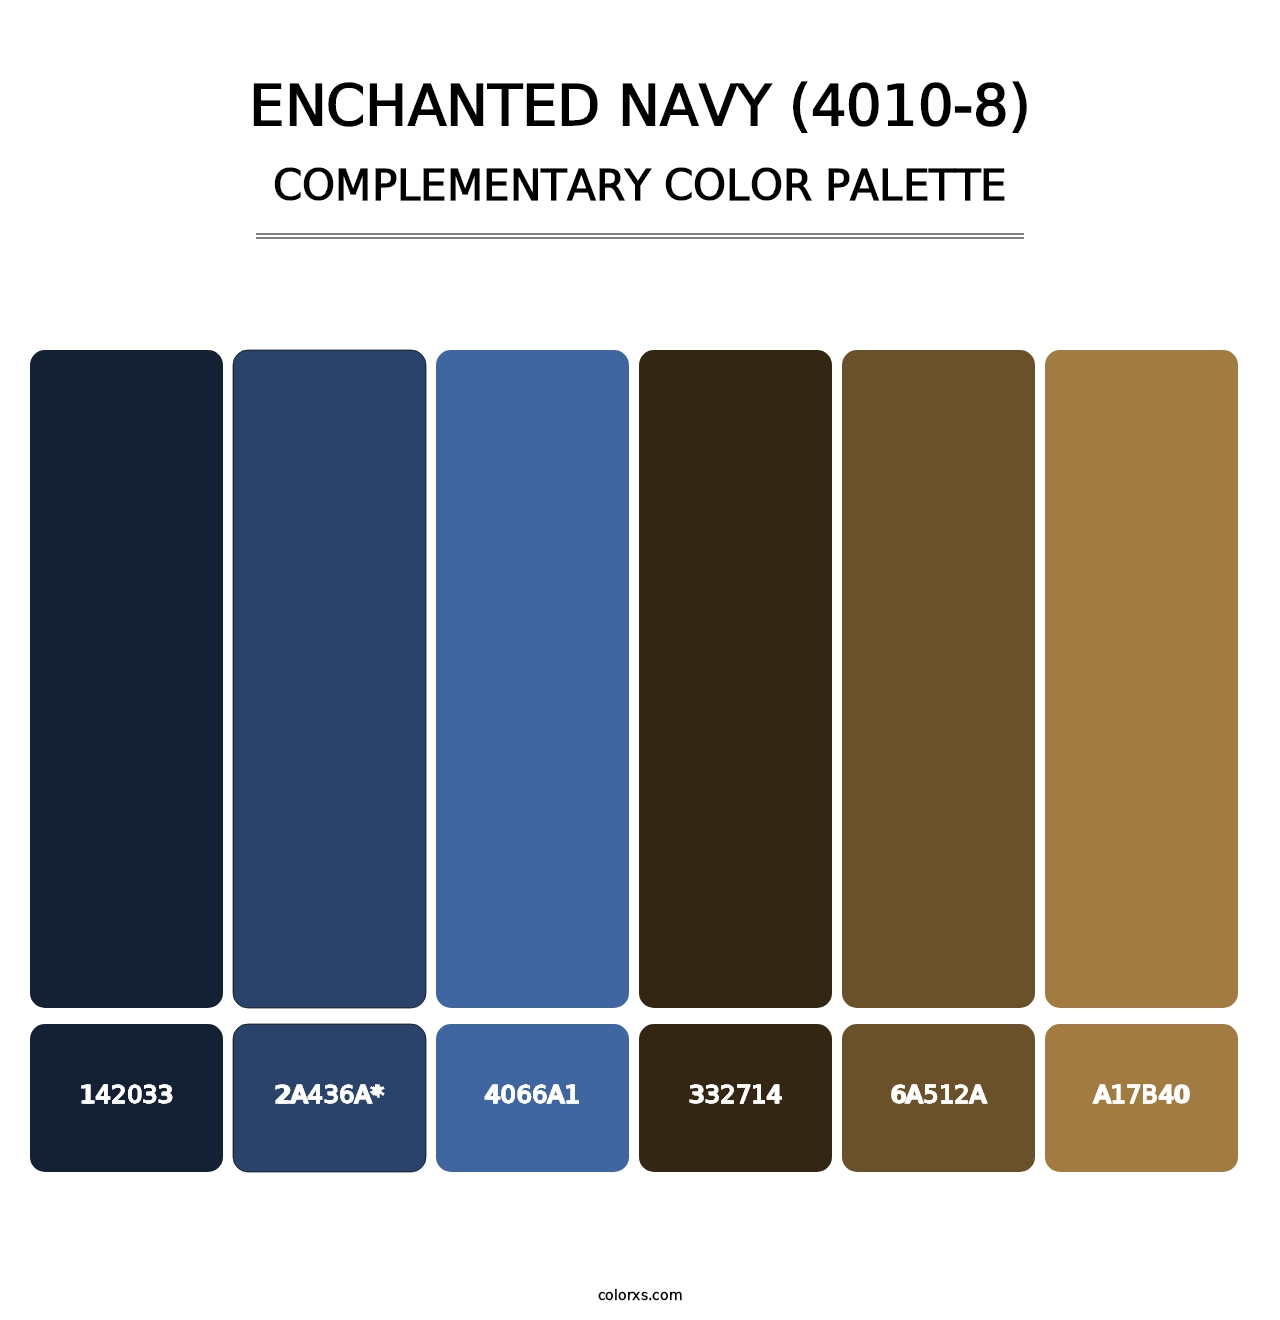 Enchanted Navy (4010-8) - Complementary Color Palette